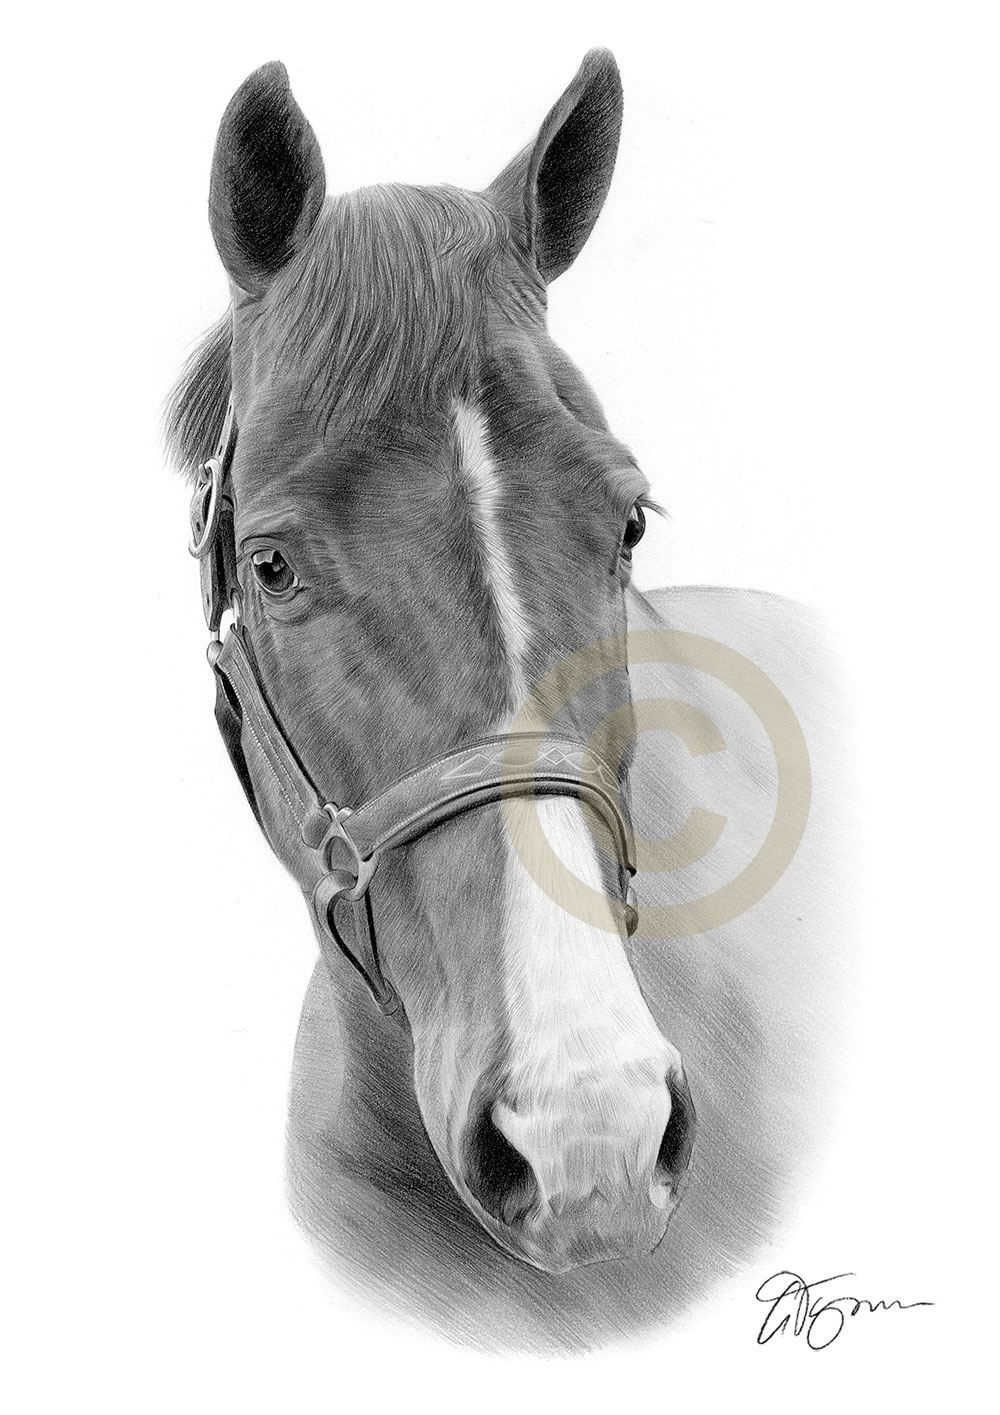 Pencil drawing commission of a horse by artist Gary Tymon